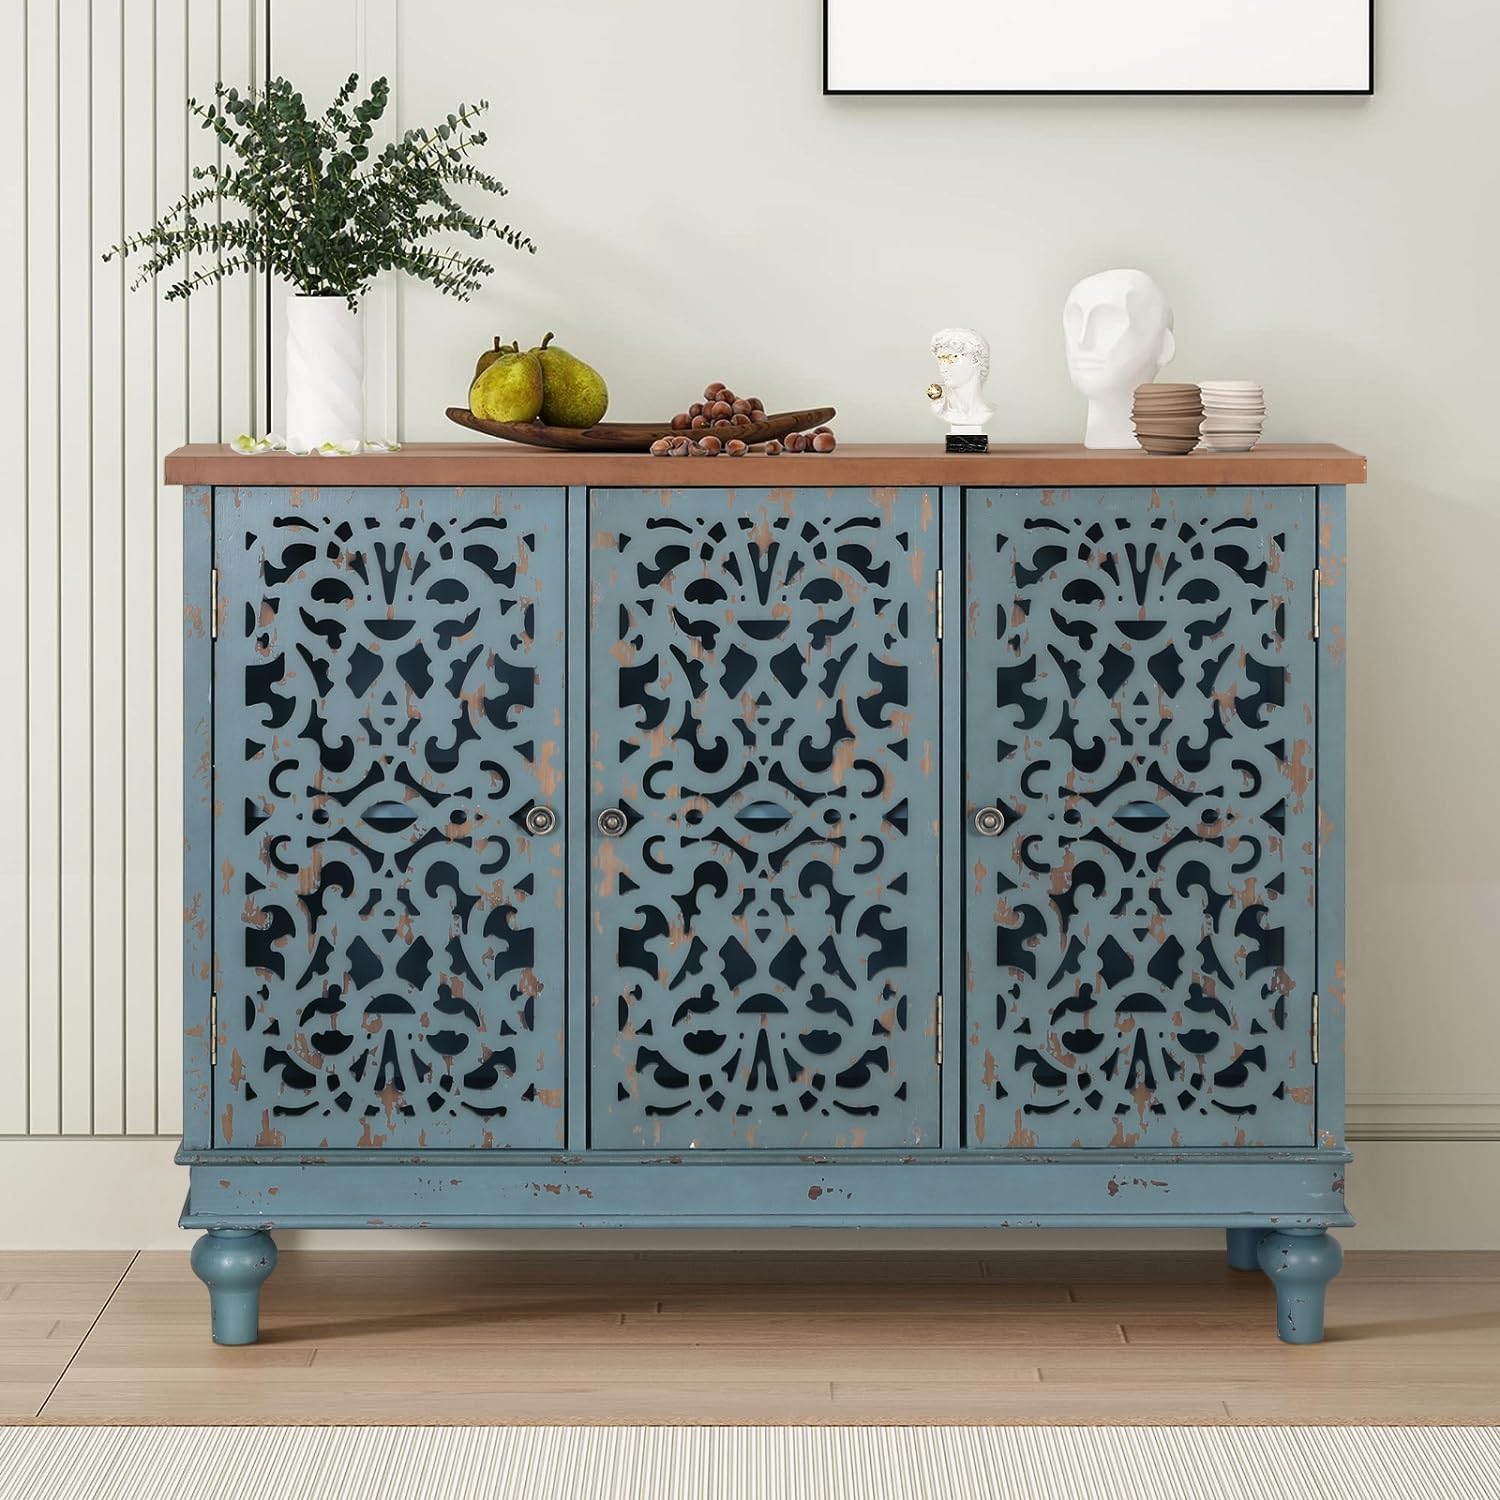 MFSTUDIO Accent Wood Storage Cabinet Arts Buffet Sideboard Carved Organizer with 3 Doors Storage Decorative Cabinet for Living Room Farmhouse Kitchen Stand Entryway Hallway, 13 Dx41.7 Wx31.5 H, Blue